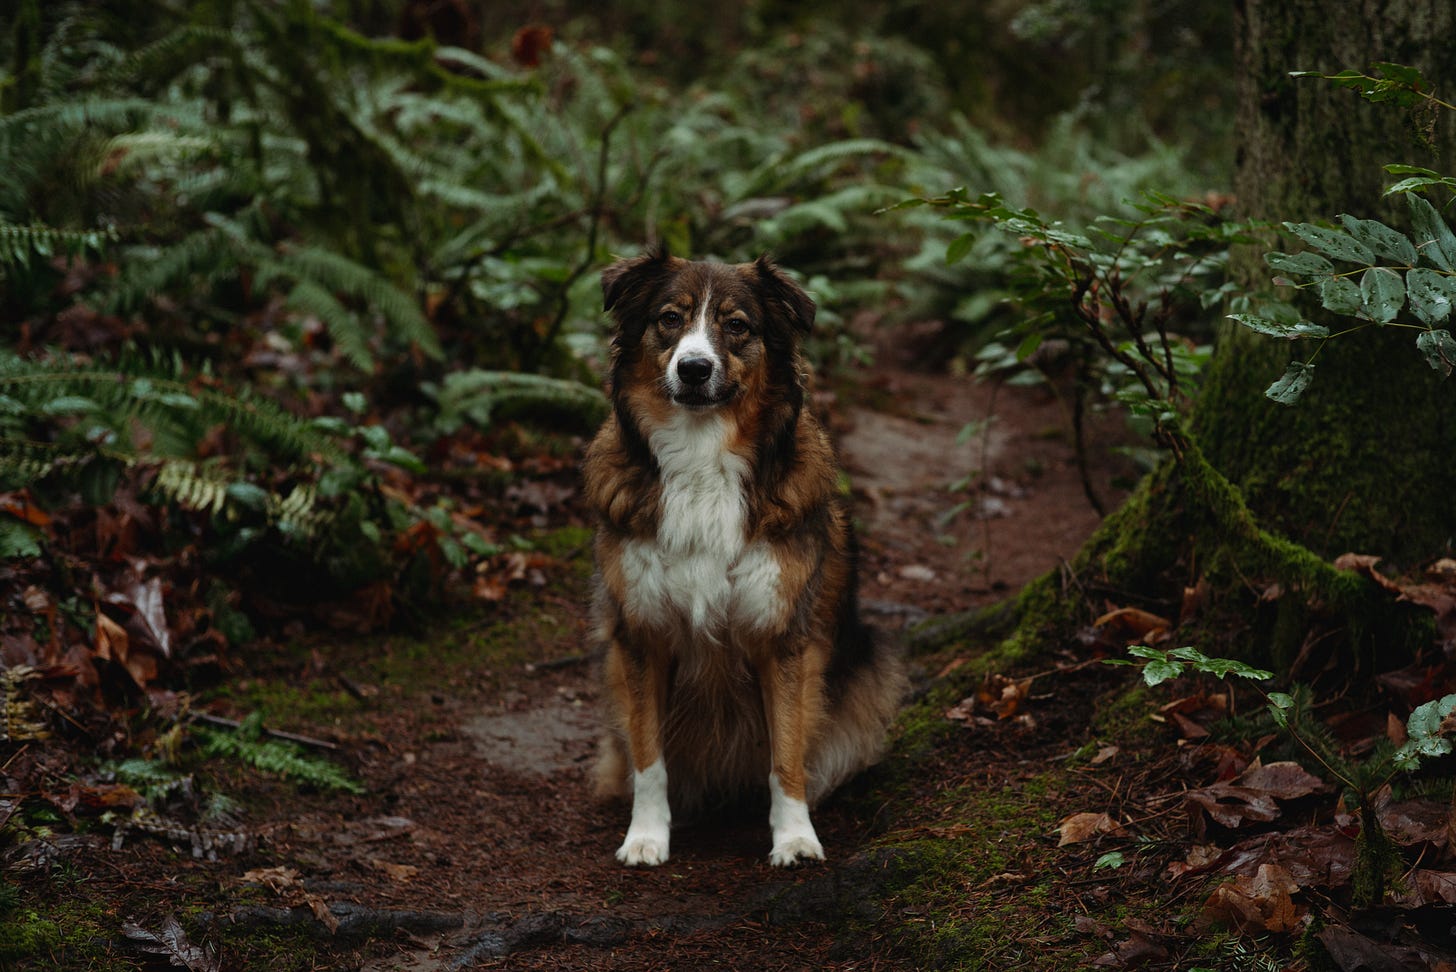 my dog lennie in the middle of the frame and trail within seward park, a nature park in seattle. she's looking sternly and frustrated we stopped for photos.